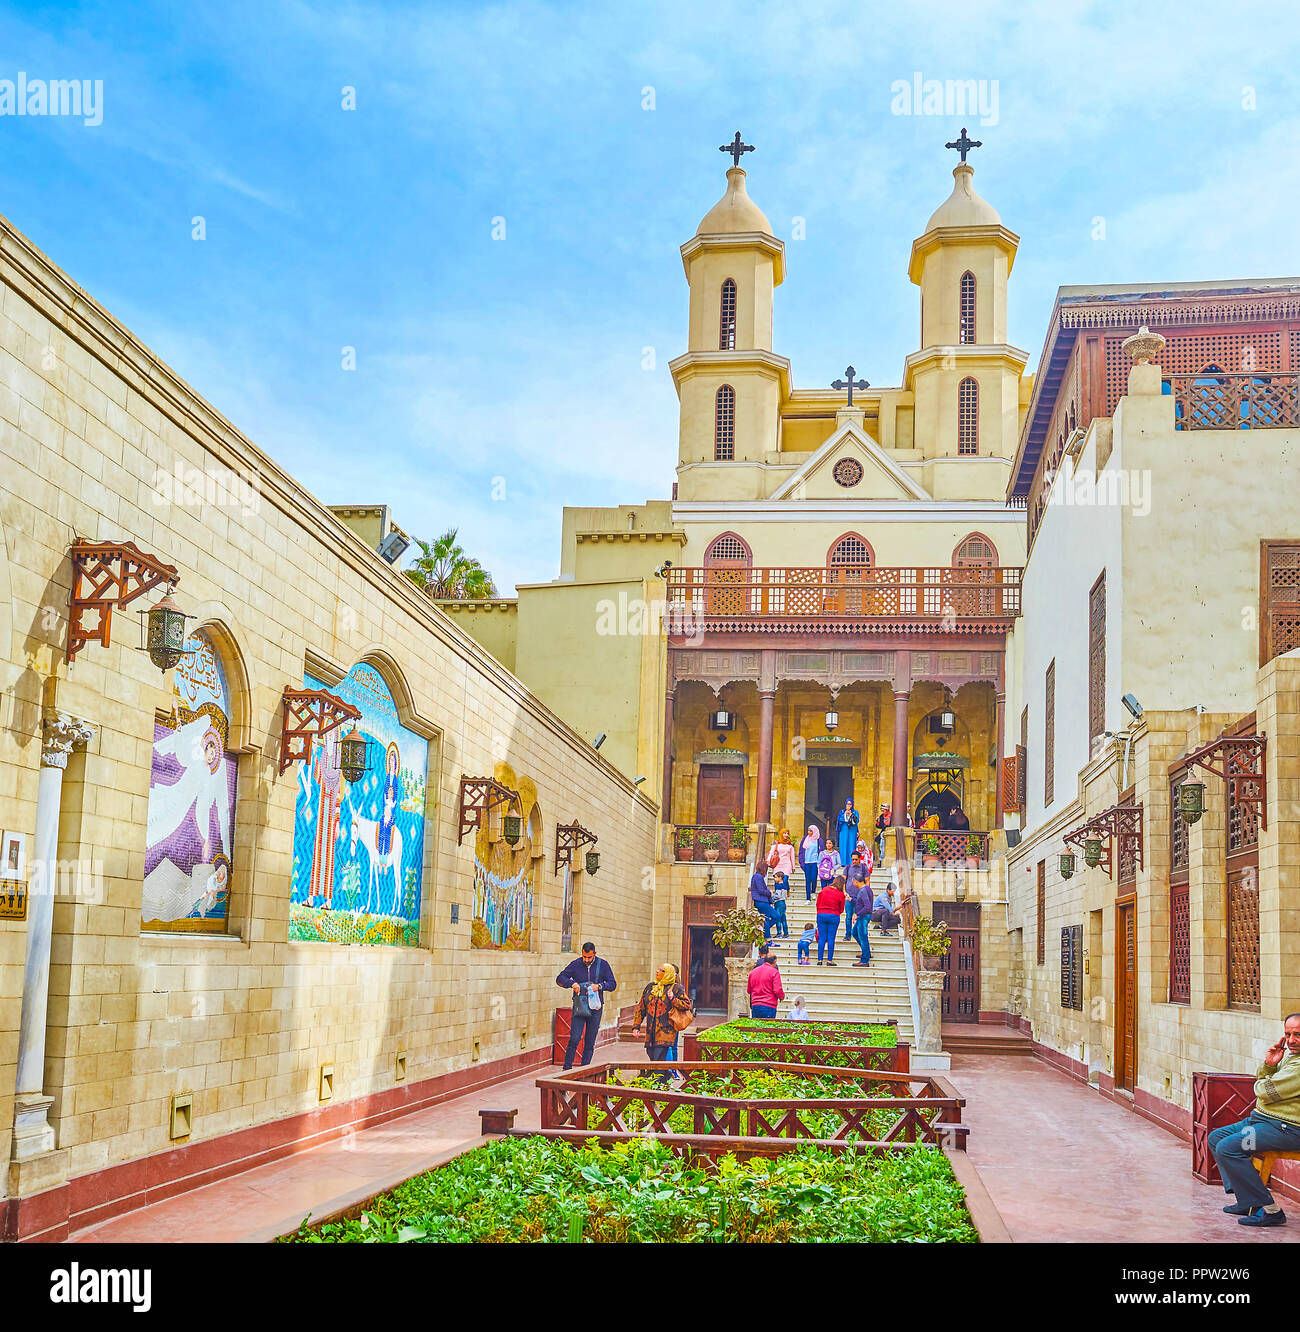 CAIRO, EGYPT - DECEMBER 23, 2017: The main way to the Hanging Church, most  known Coptic orthodox church in Egypt, on December 23 in Cairo Stock Photo  - Alamy